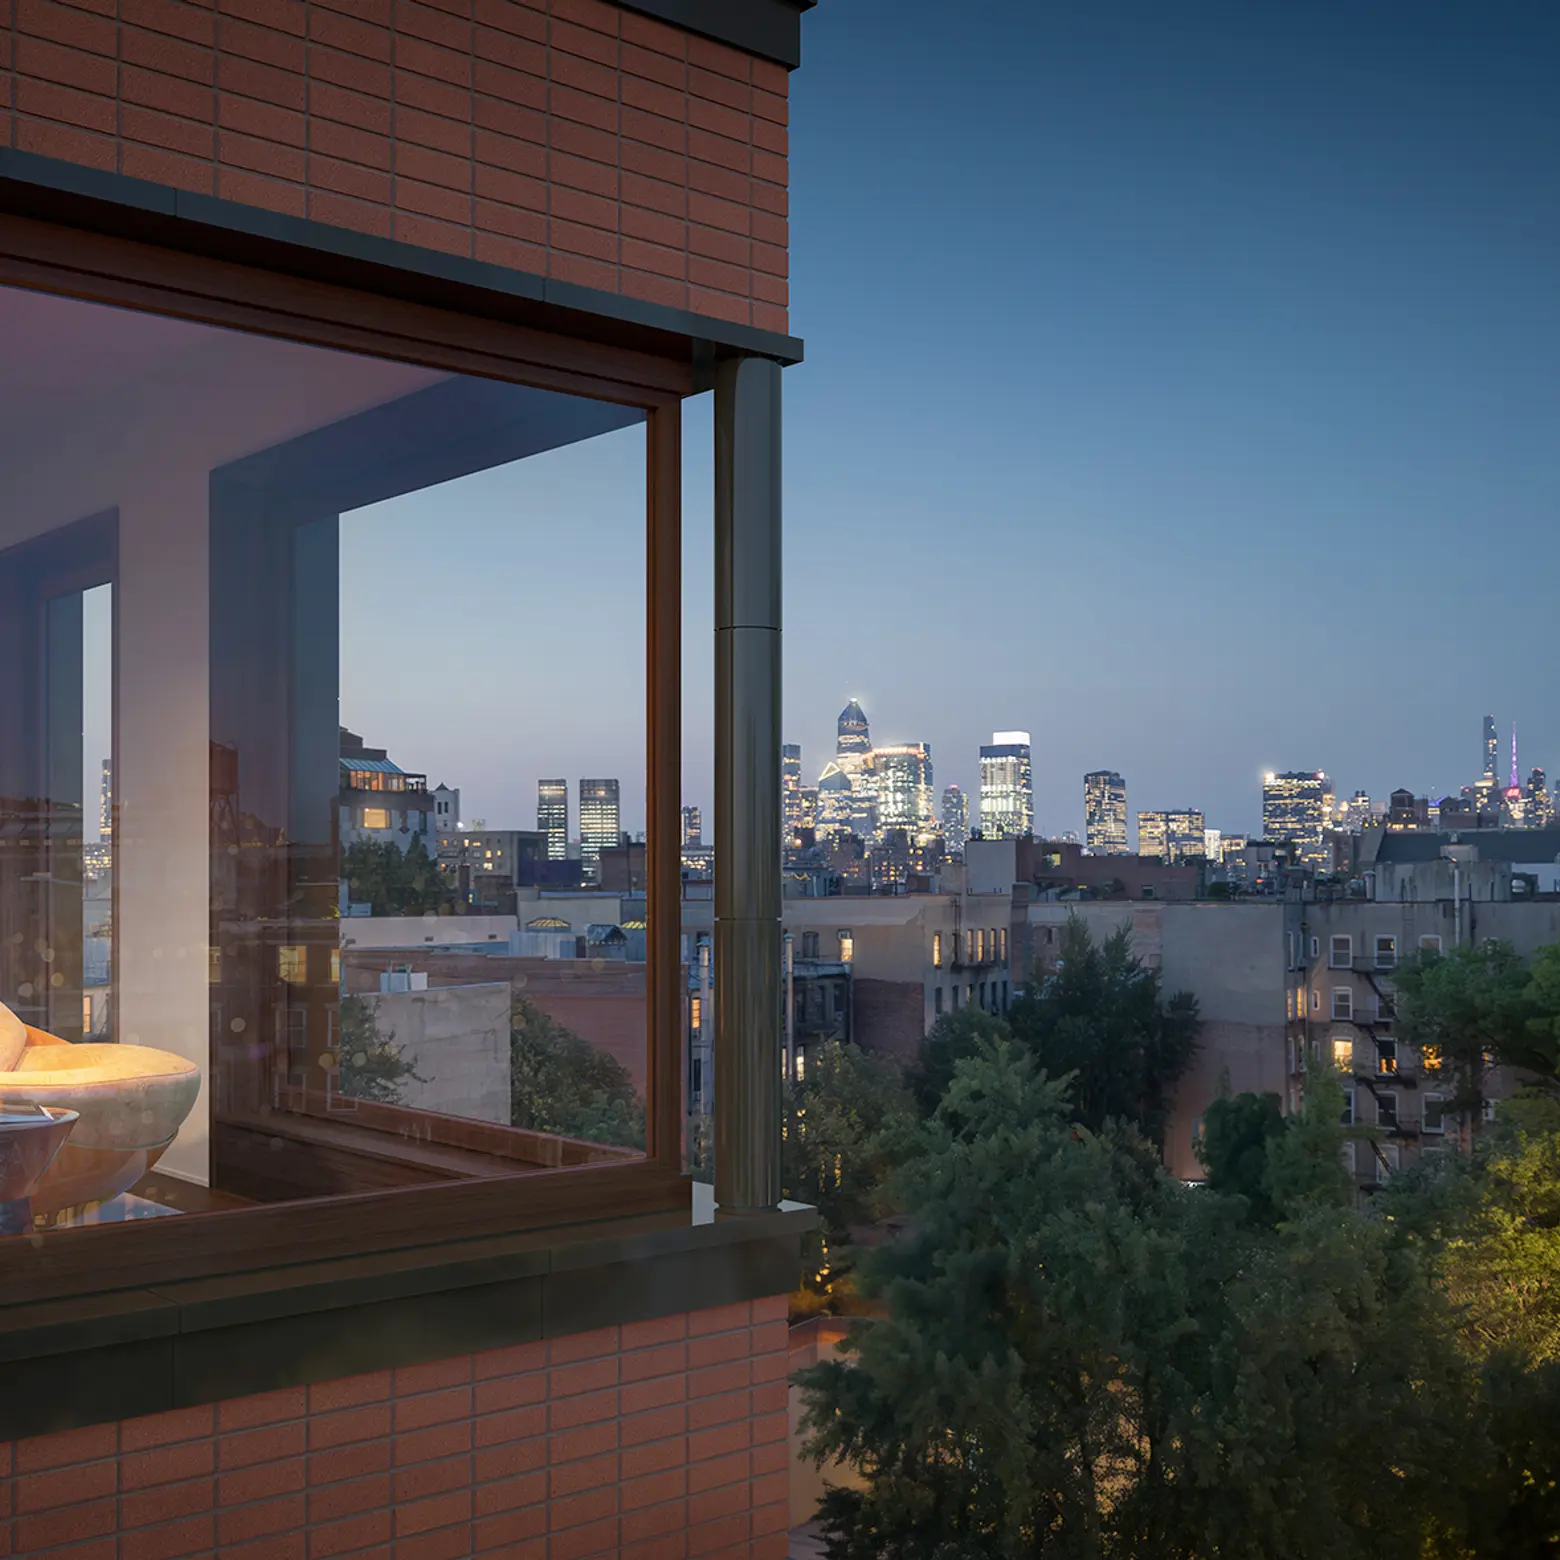 Loft-like residences in Soho designed by Selldorf Architects